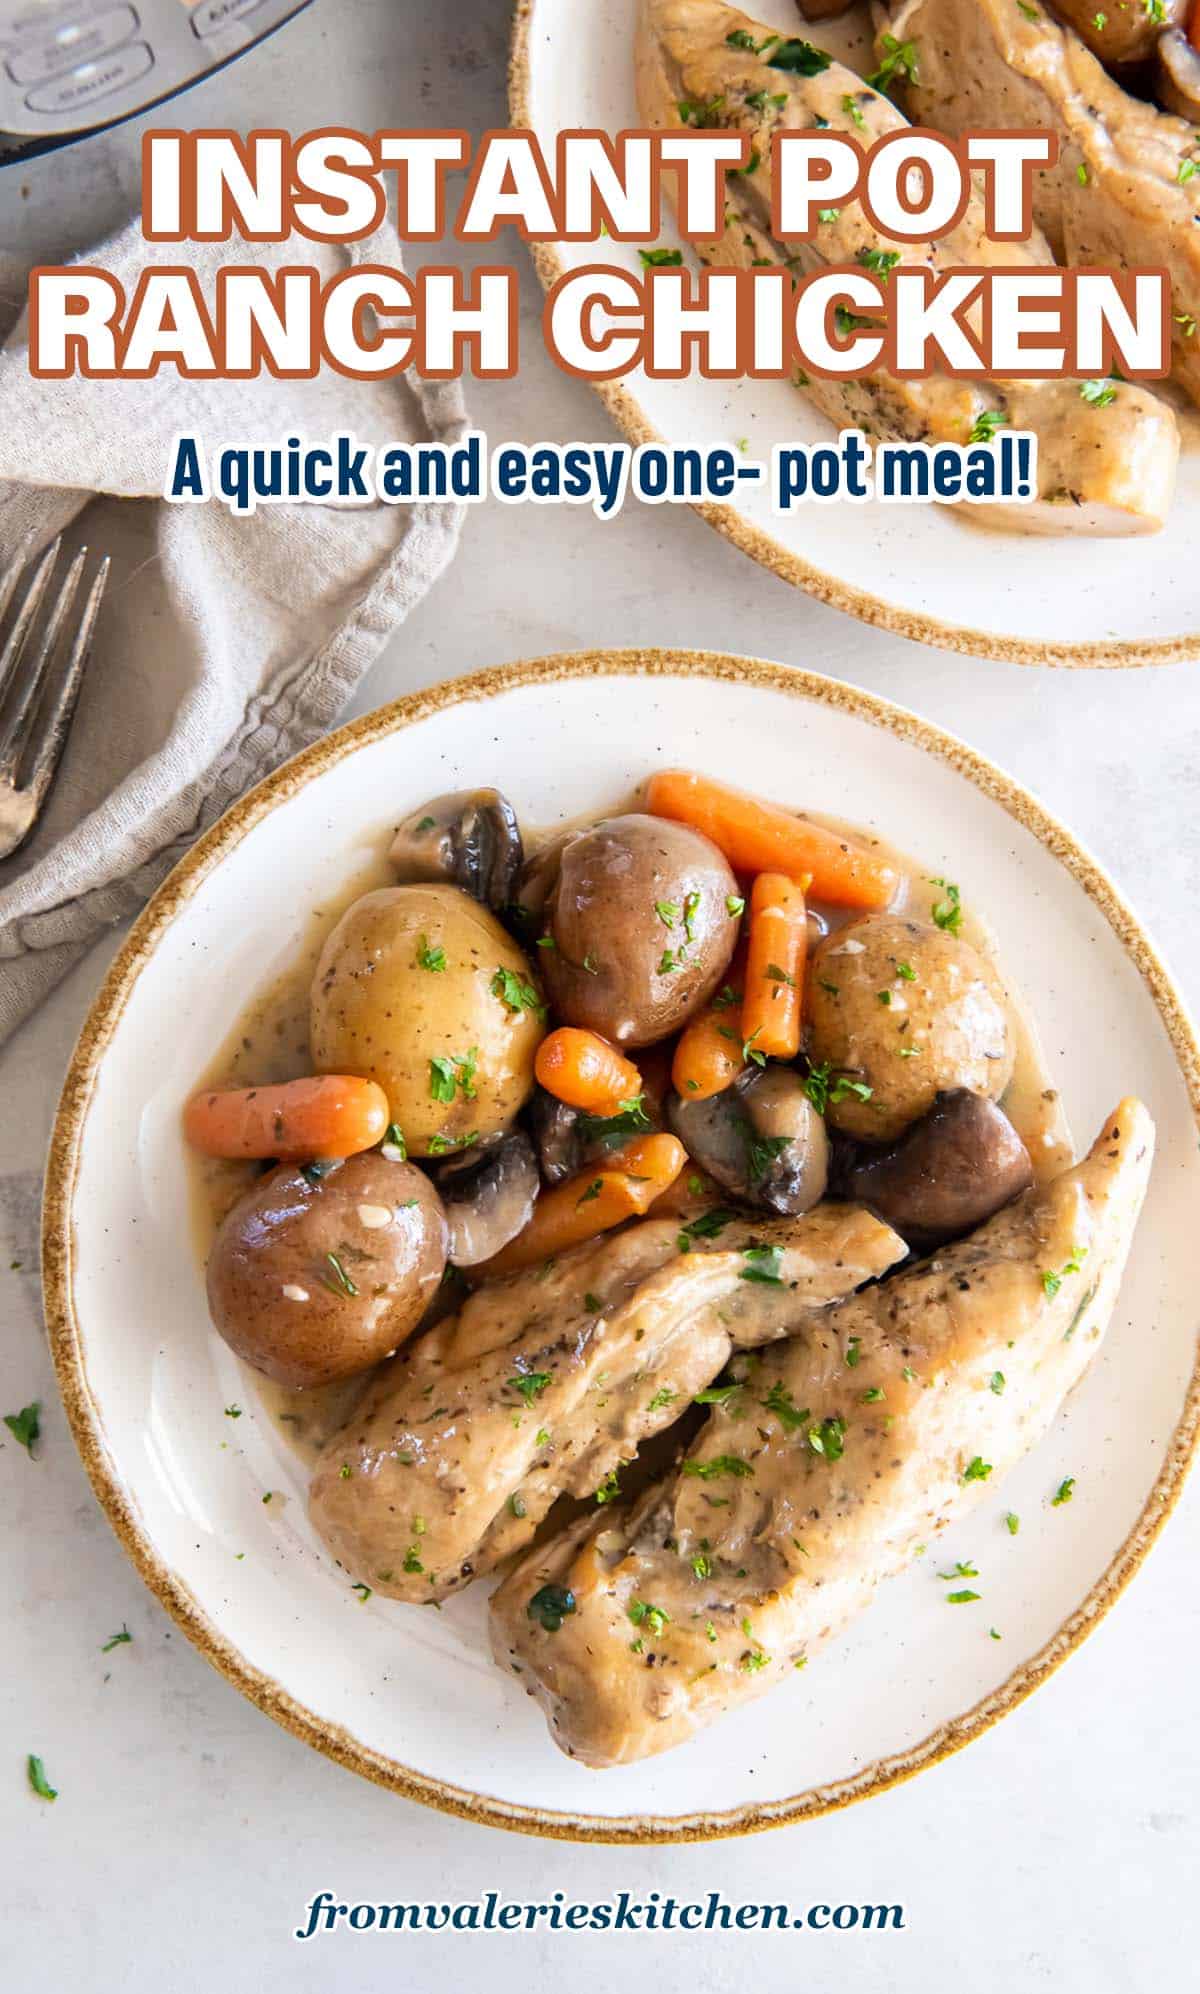 A top down shot of two plates filled with ranch chicken with potatoes, carrots and mushrooms next to an Instant Pot with text.